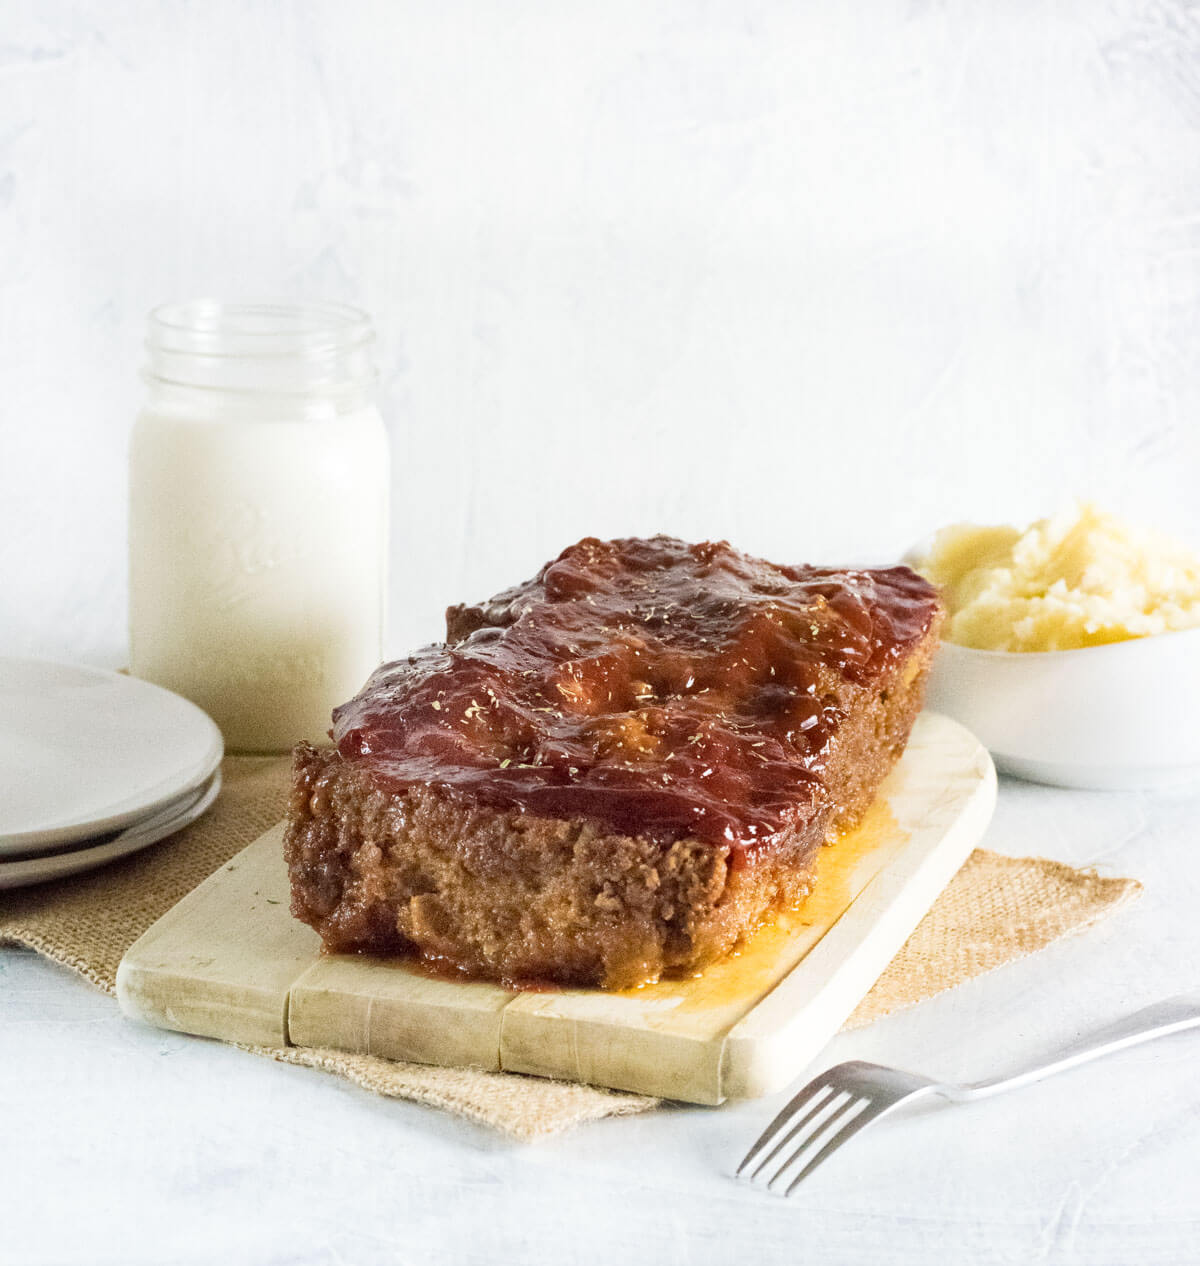 Meatloaf recipe with onion soup mix.